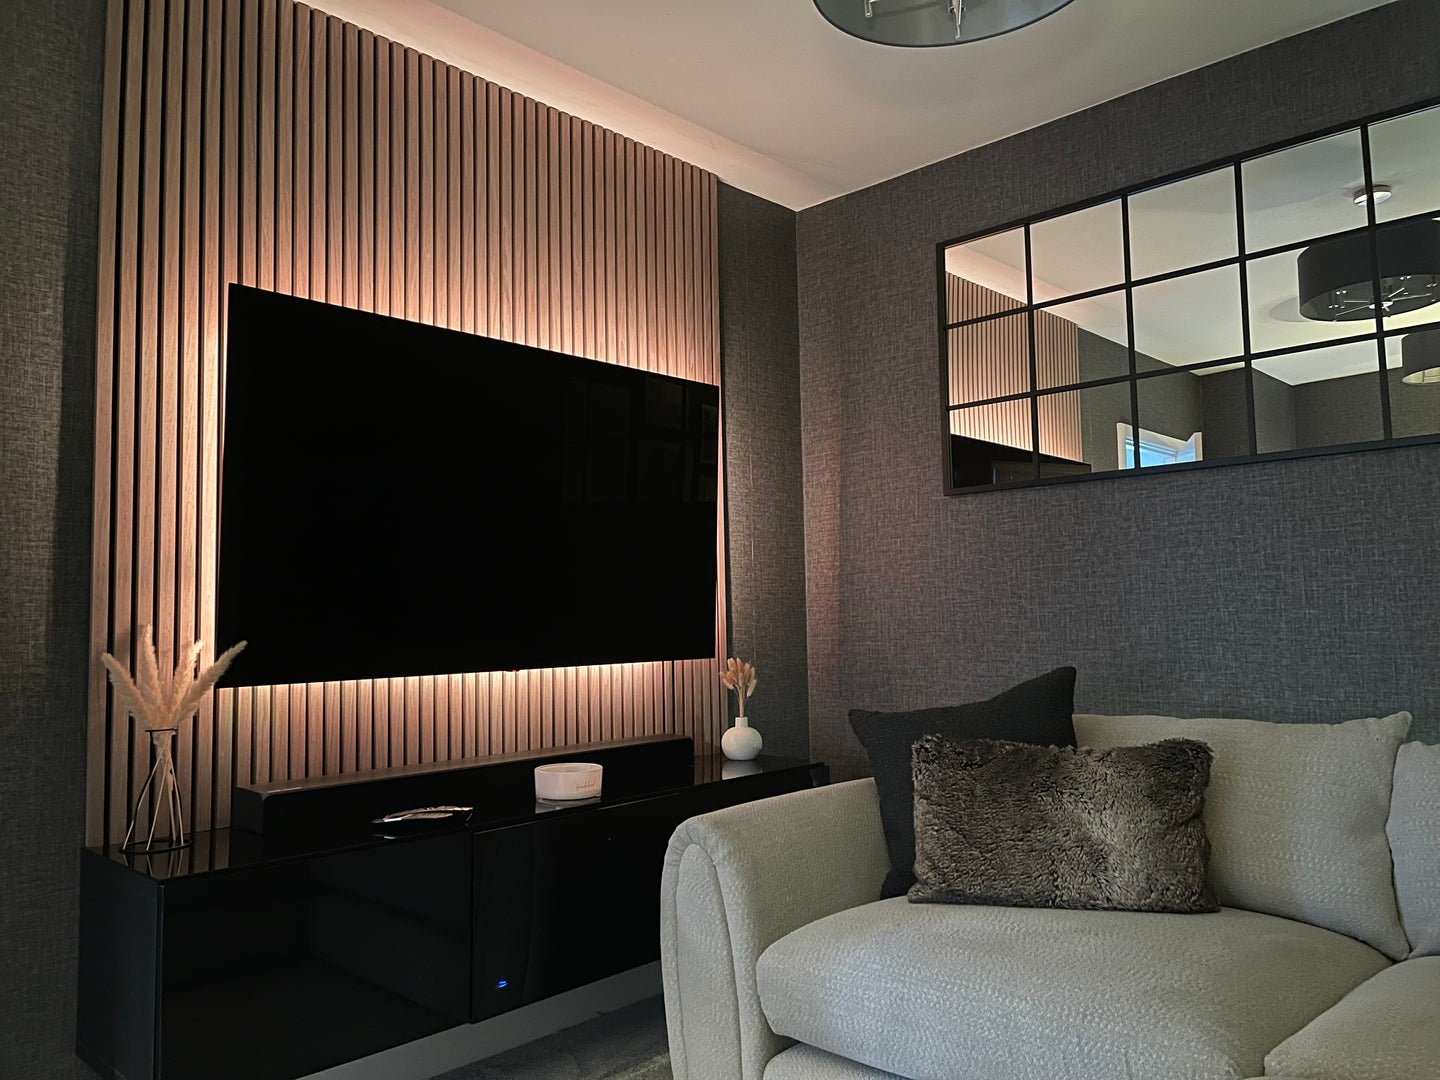 Enhance your home with acoustic TV wall panels